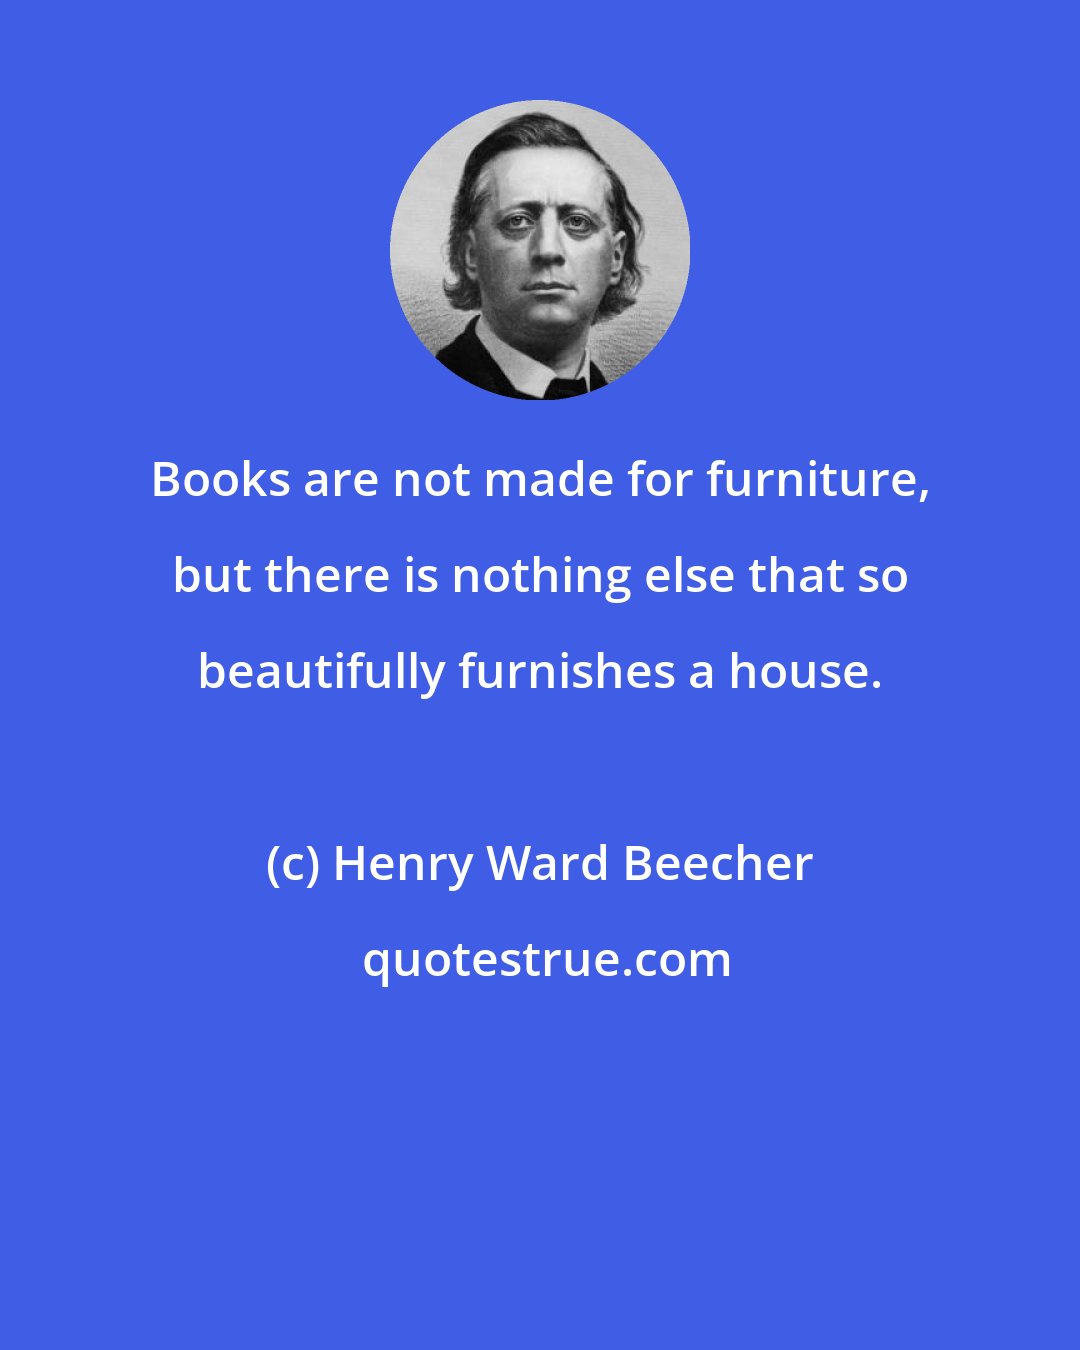 Henry Ward Beecher: Books are not made for furniture, but there is nothing else that so beautifully furnishes a house.